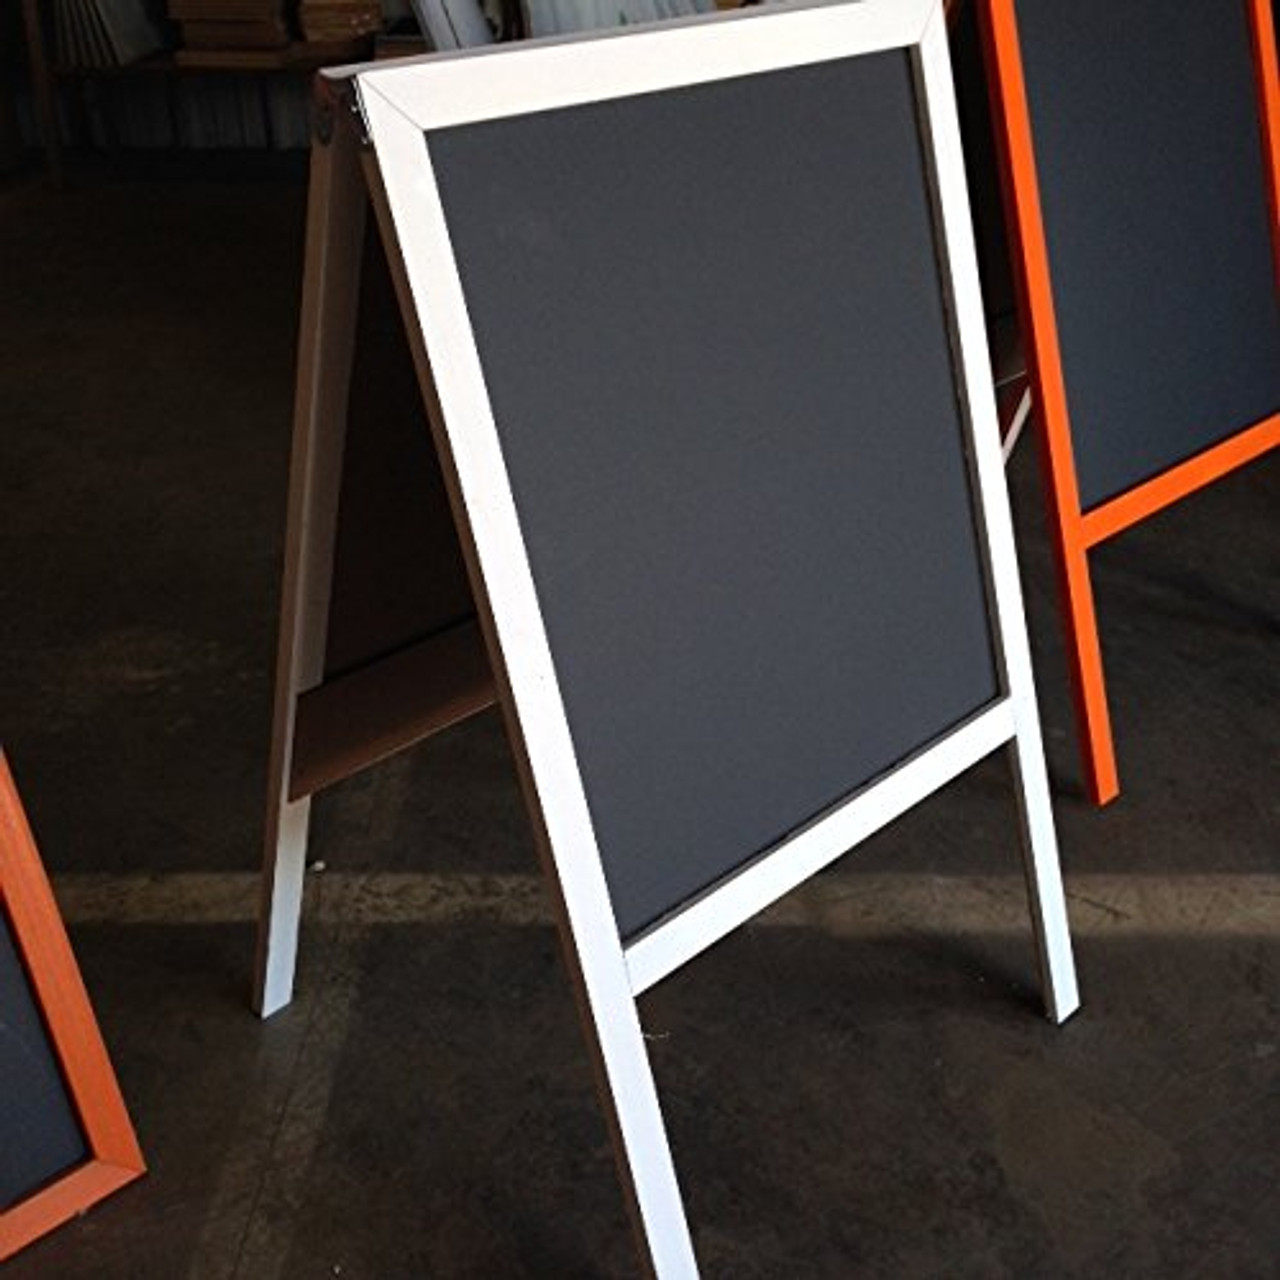 Sidewalk Display Sign Announcement Board 39 X 24 Black Chalkboard White Wood Frame Double Sided Bridal Boutique Wedding Banquet